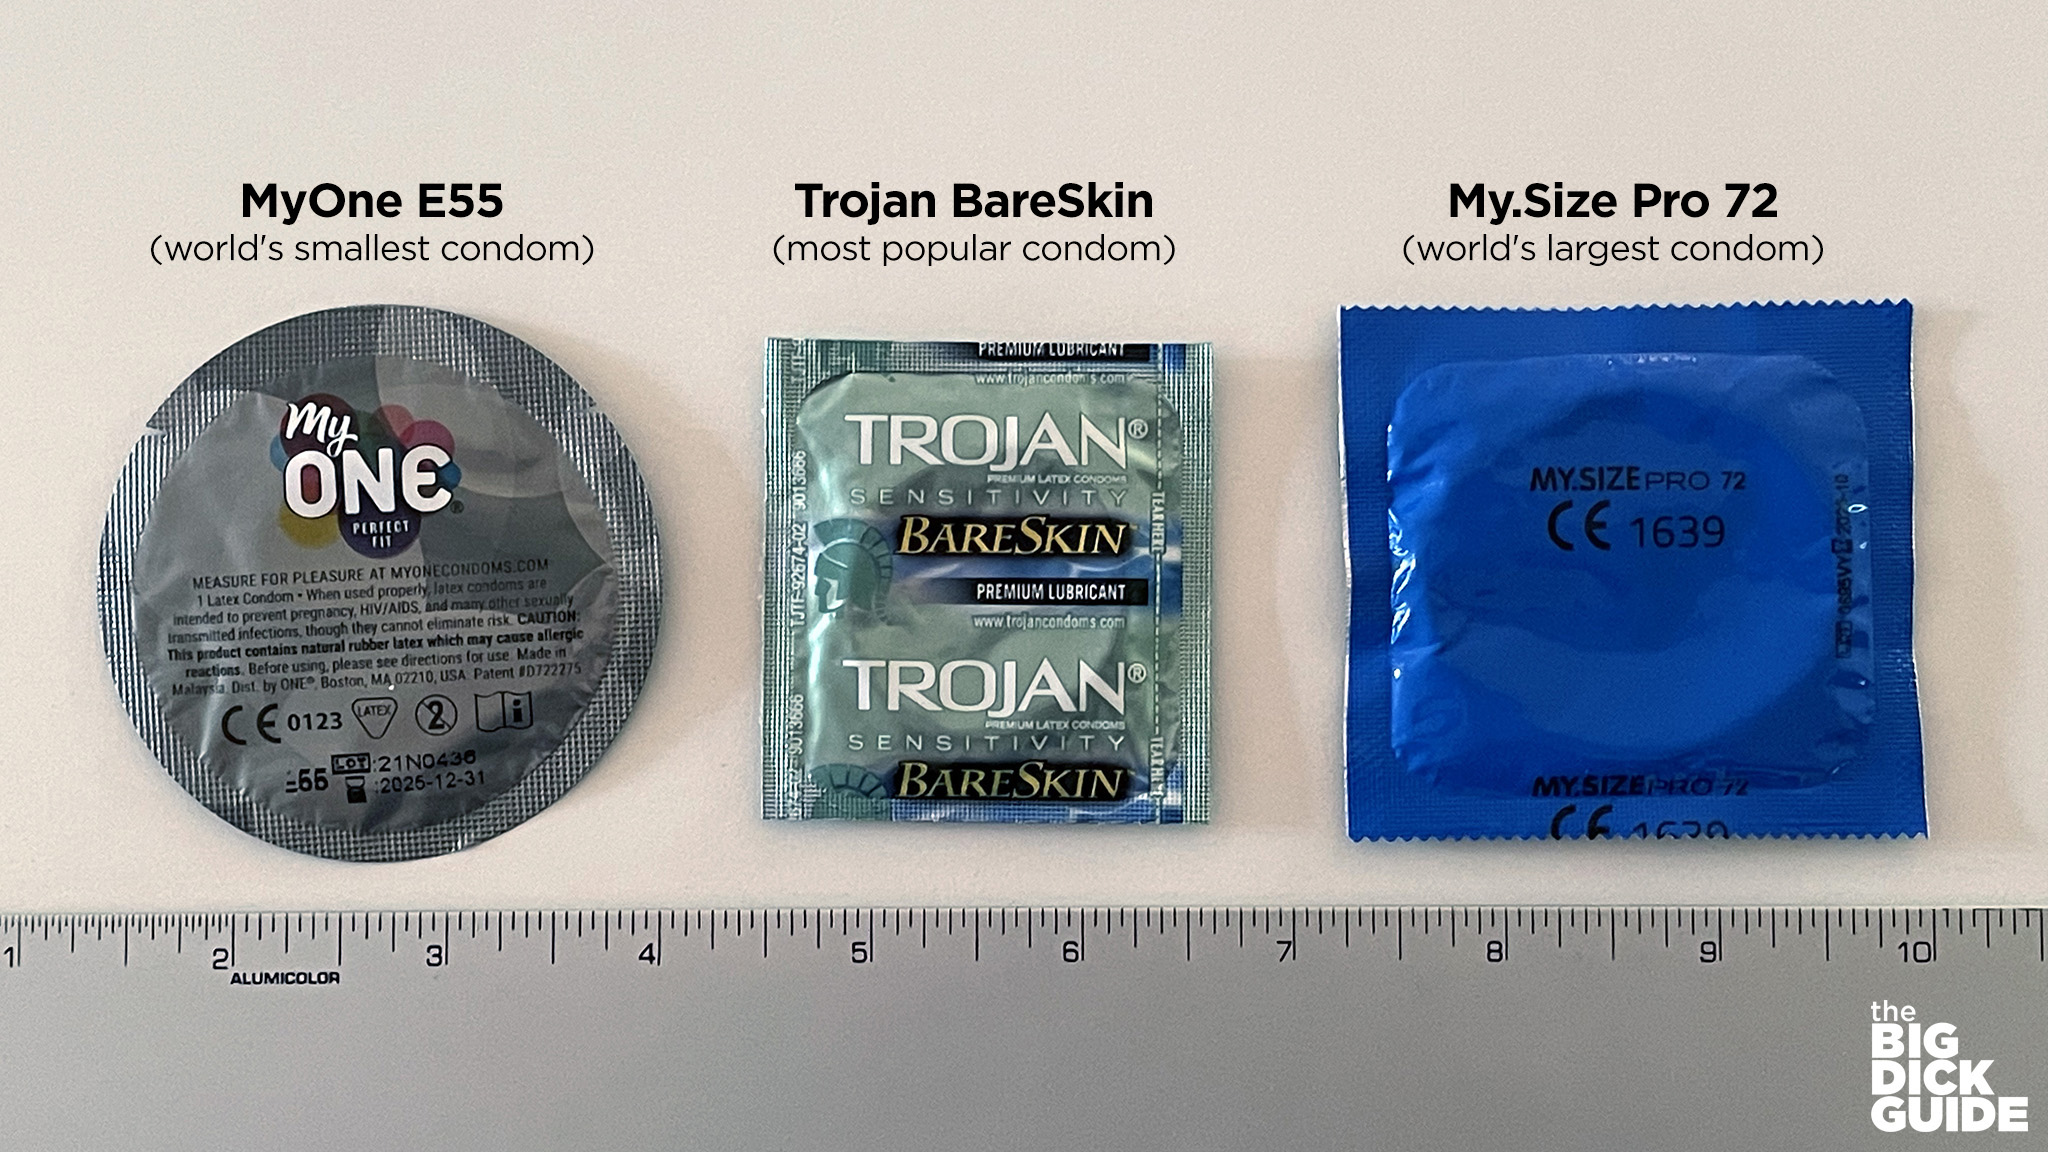 Trojans smallest condom what is Which Trojan